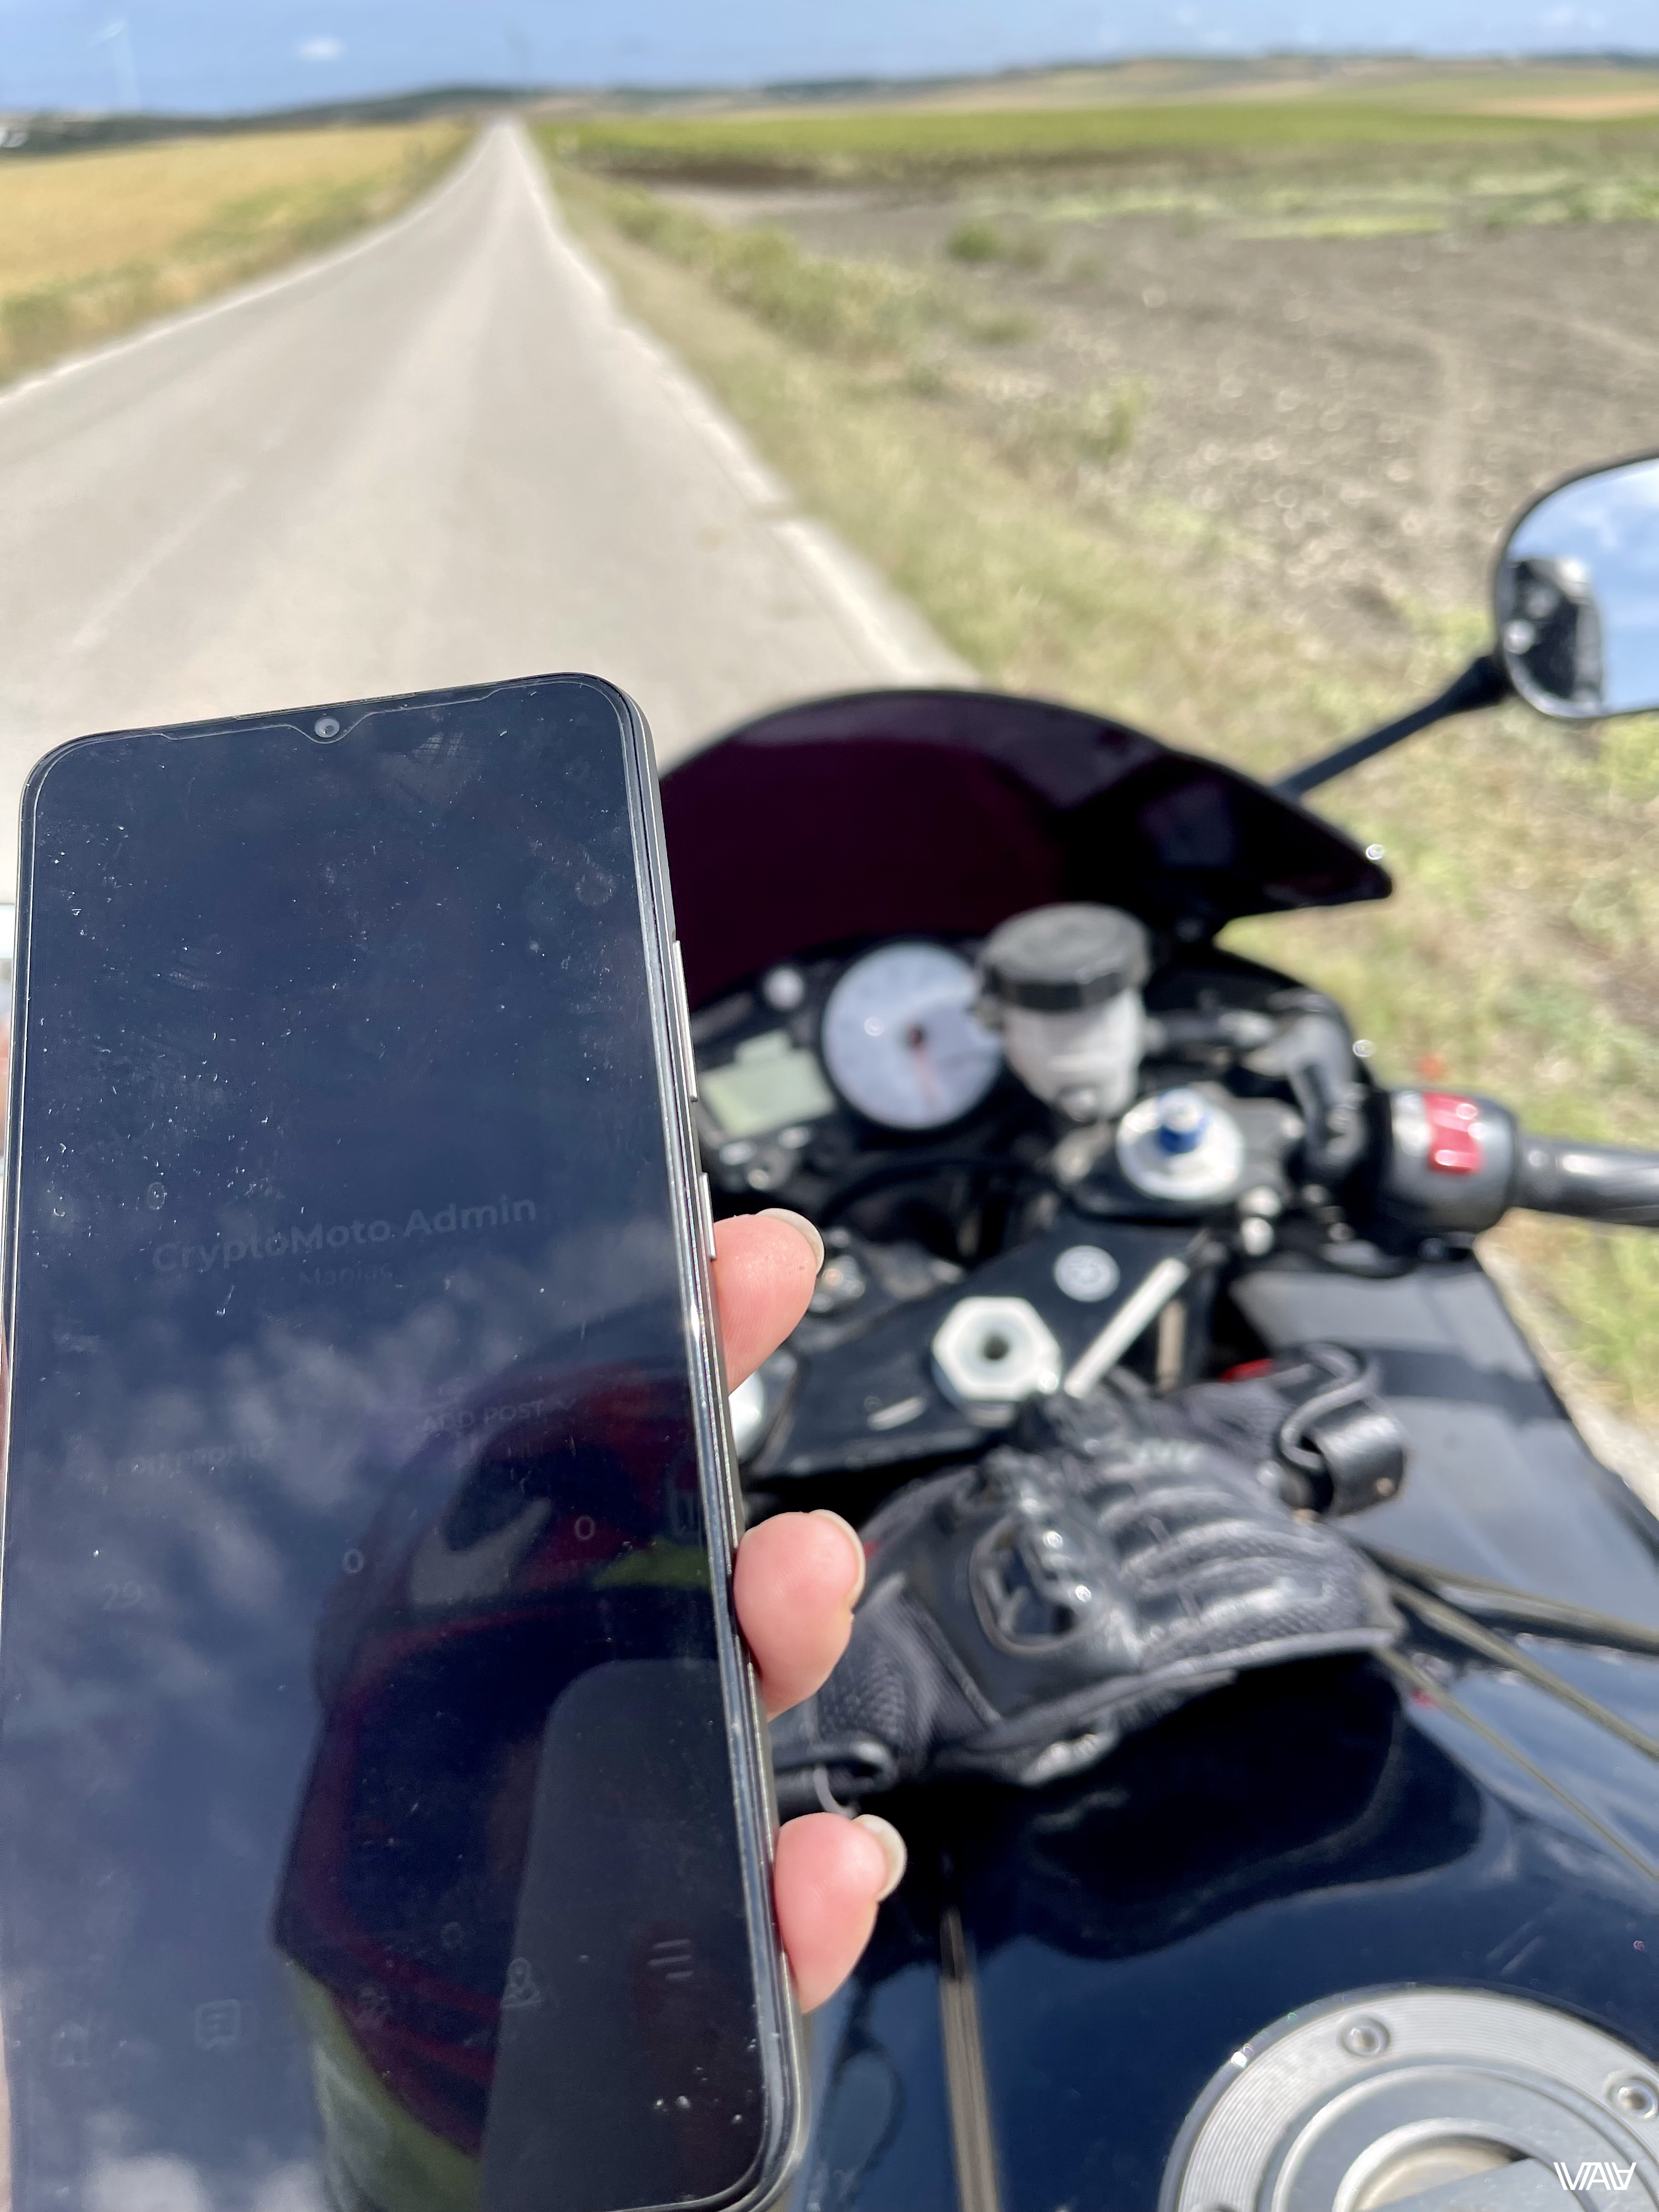 The best app for motorcyclists and bikers - CryptoMoto